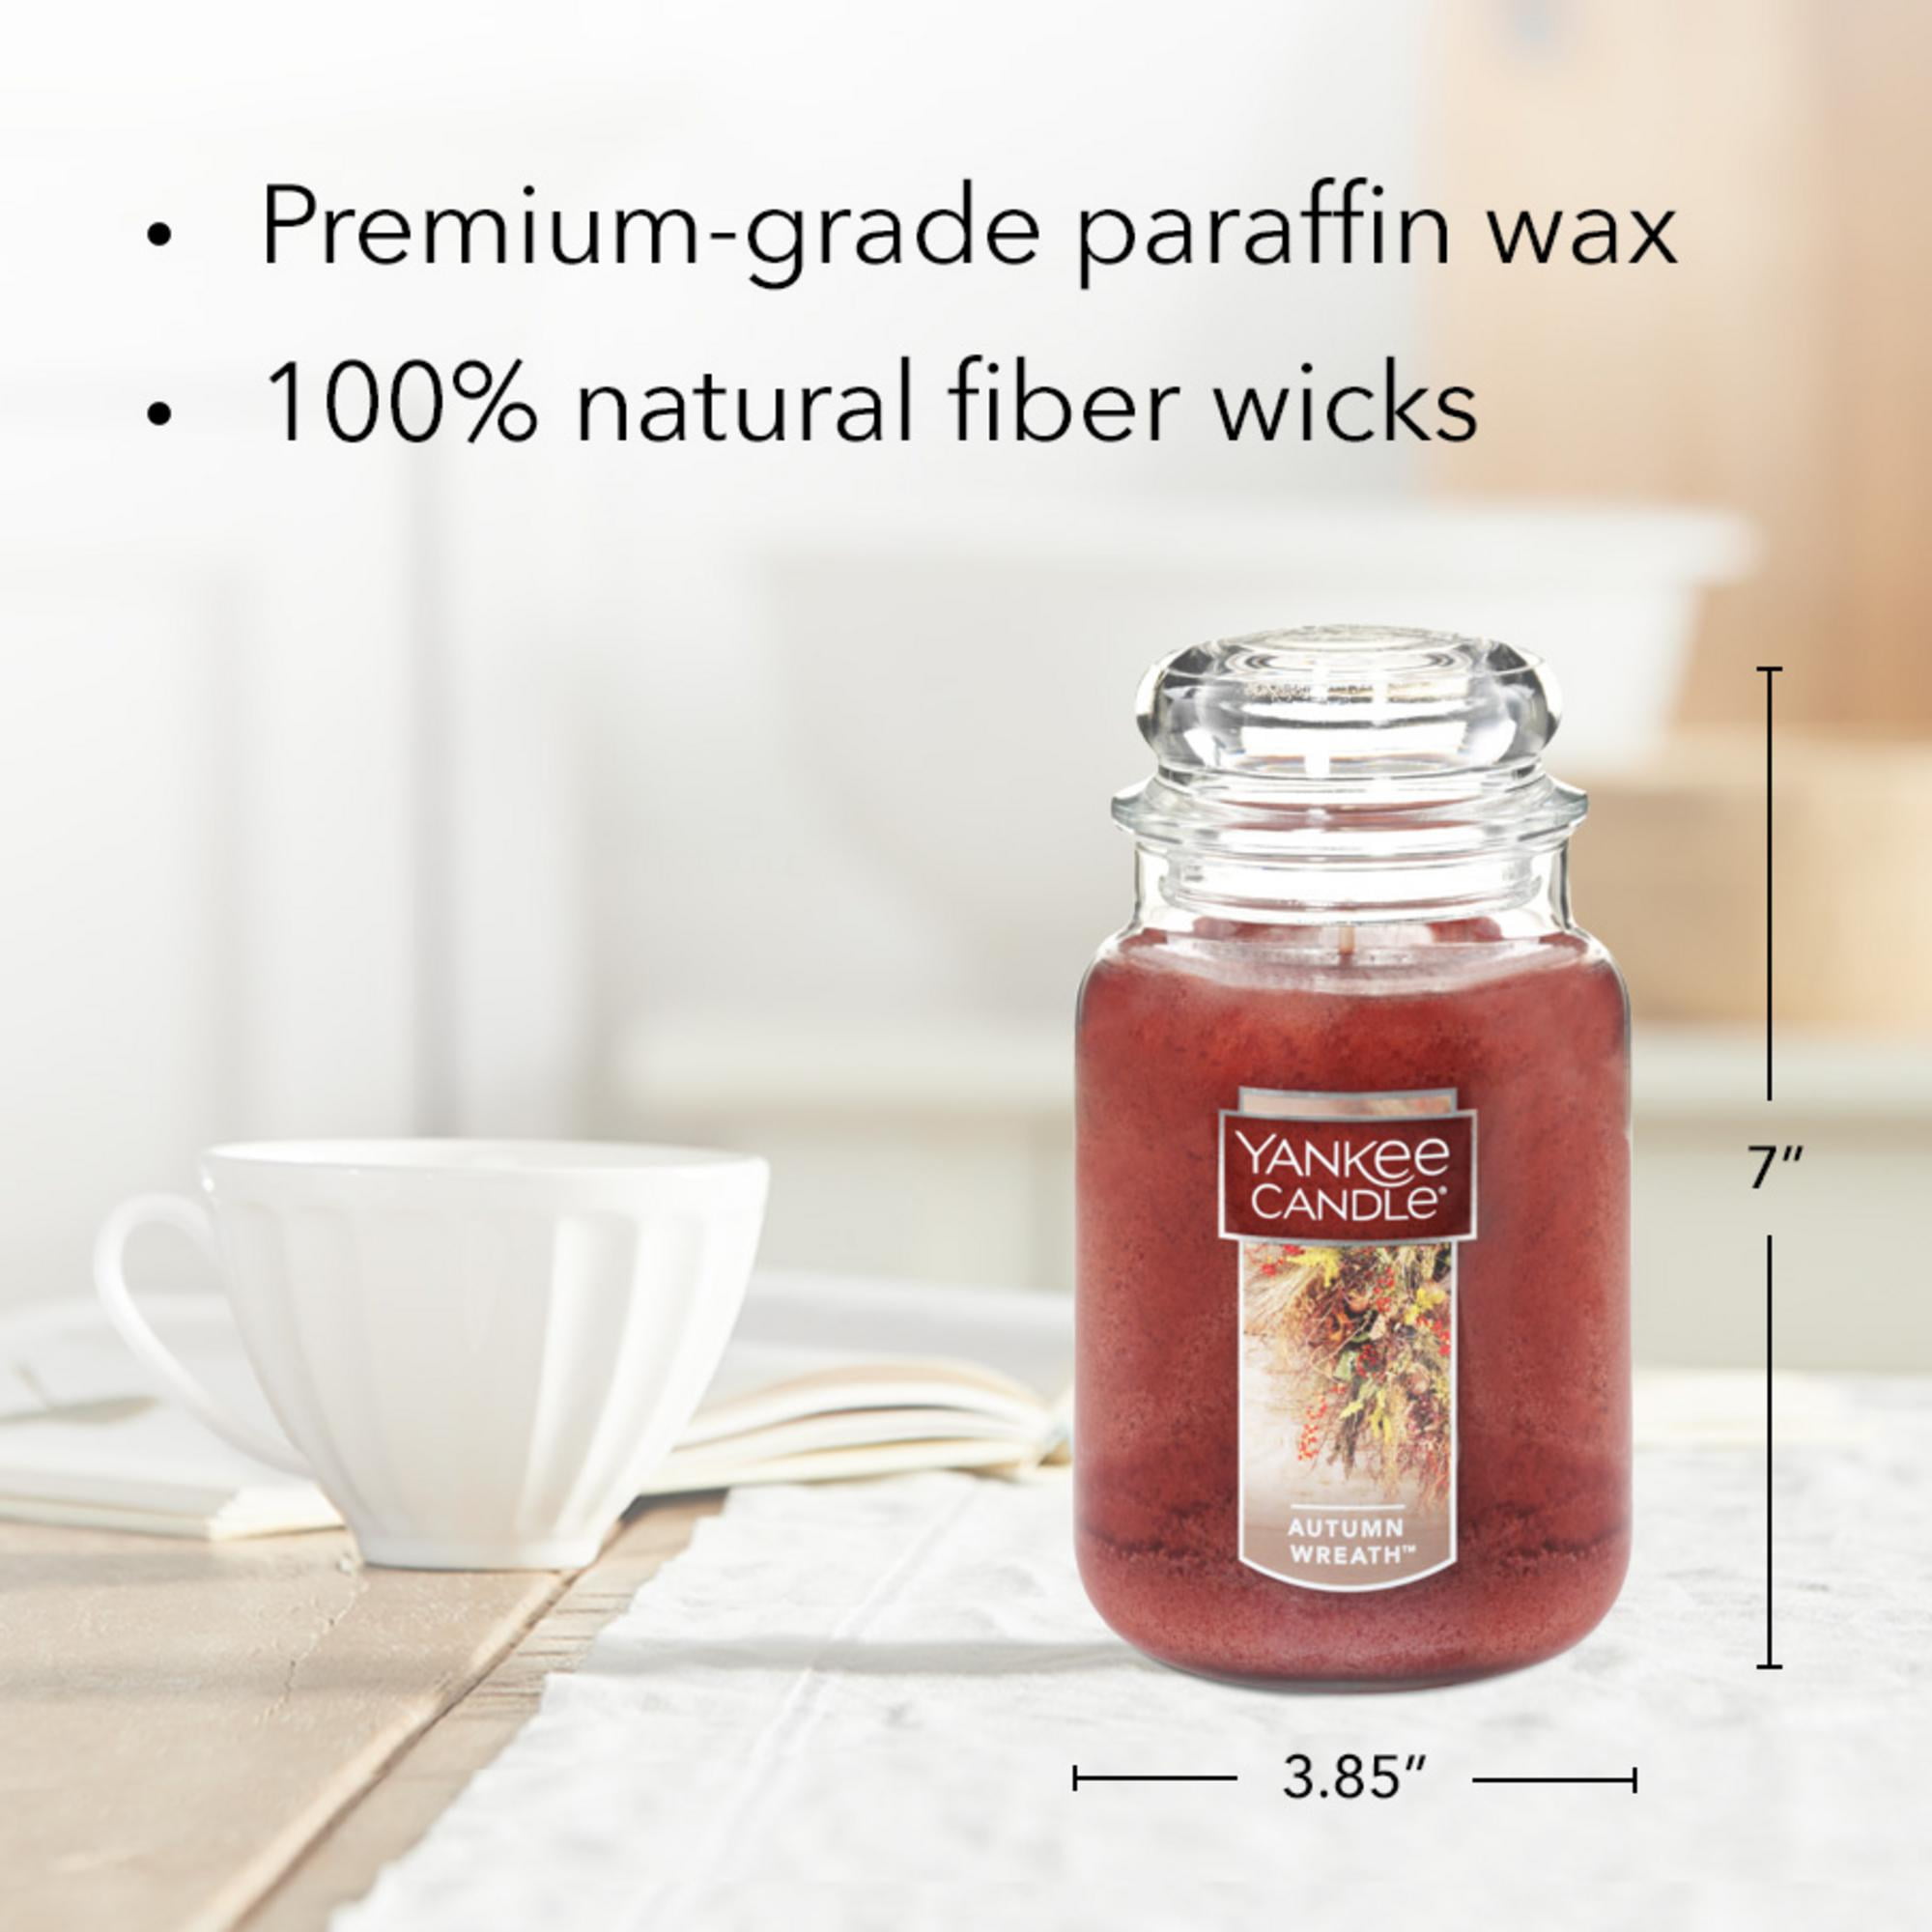 Yankee Candle Scentplug Starter Pack in Autumn Wreath 